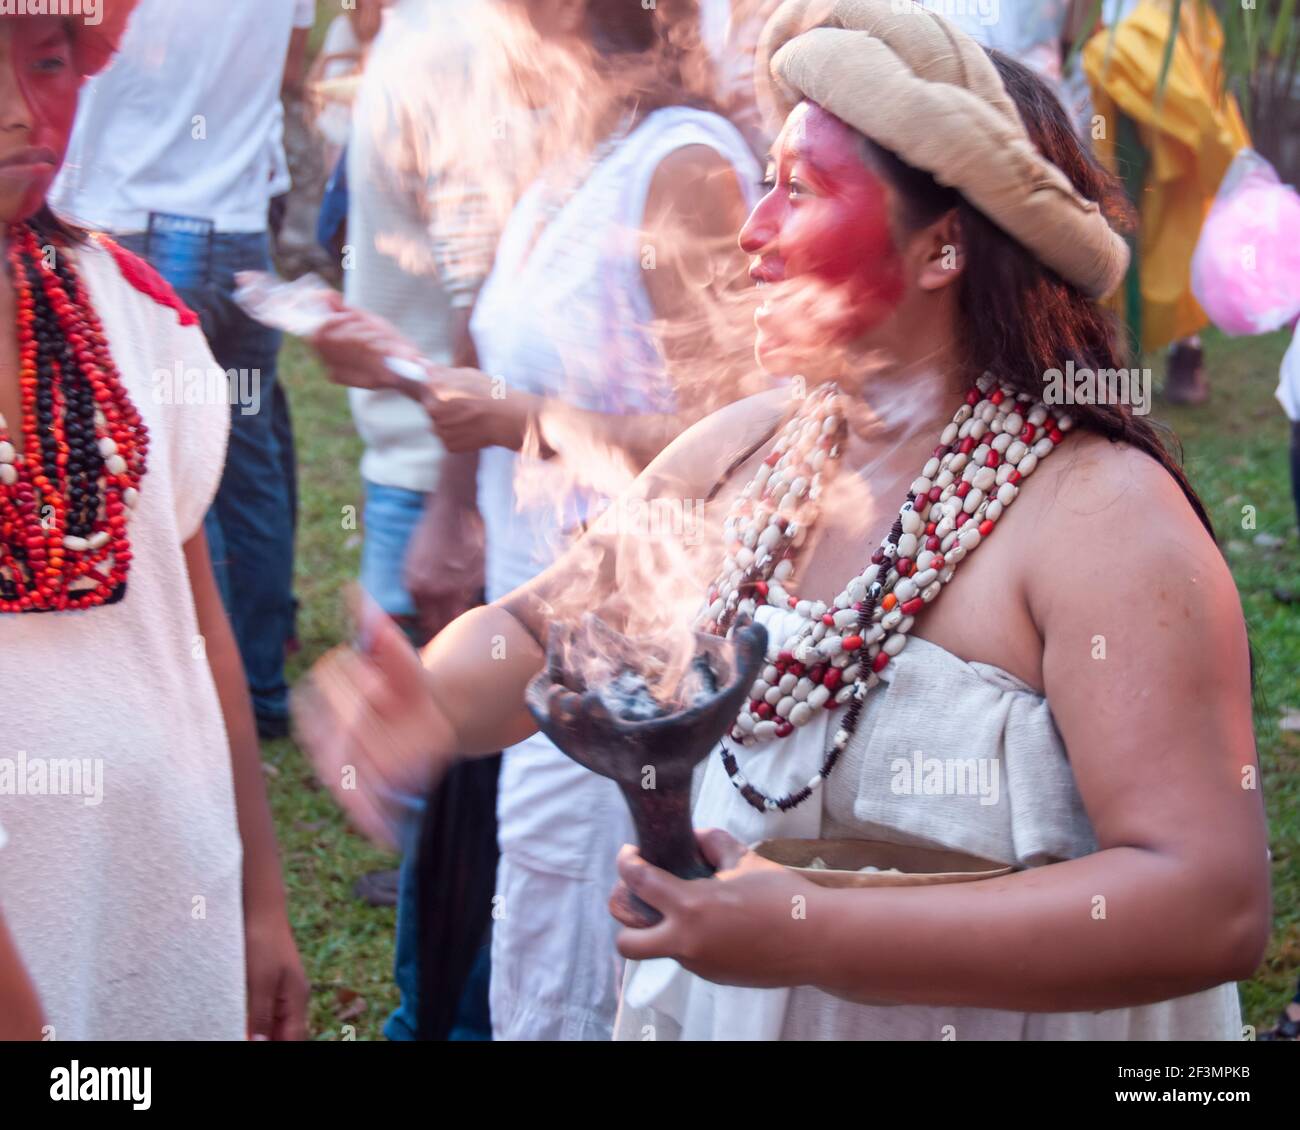 Moving image of young Mayan woman, dancing with lit brazier with a copal in her hands in a local ceremony in her village in Mexico Stock Photo